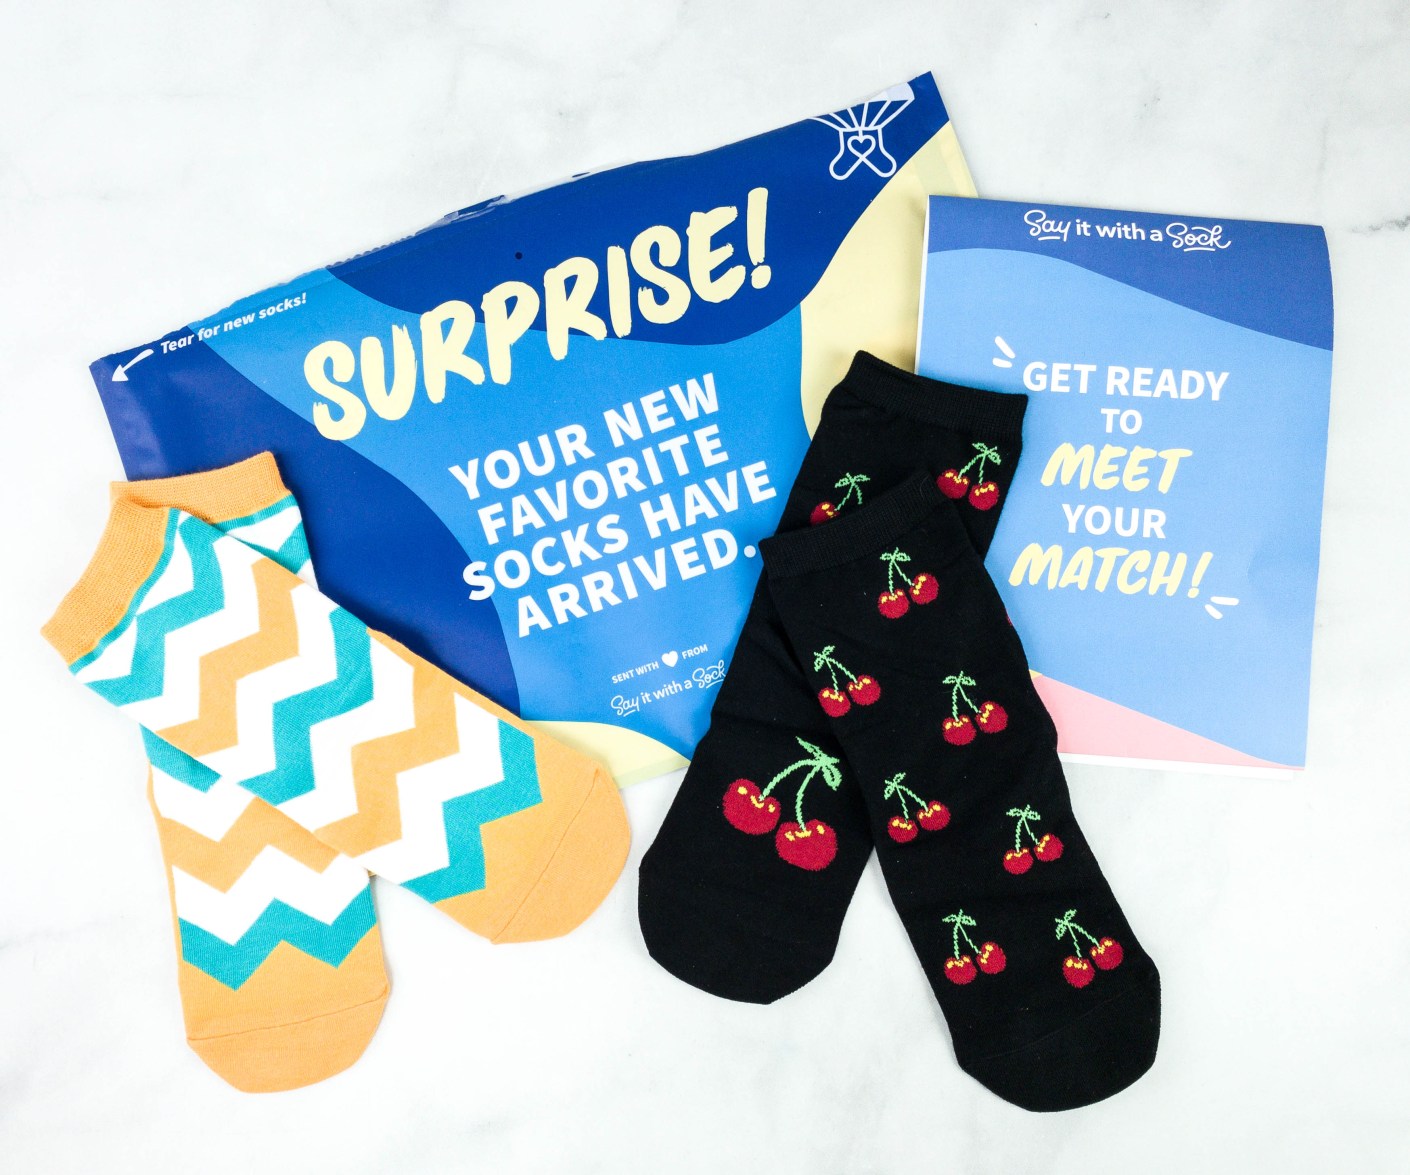 Say it with a Sock Reviews: Get All The Details At Hello Subscription!